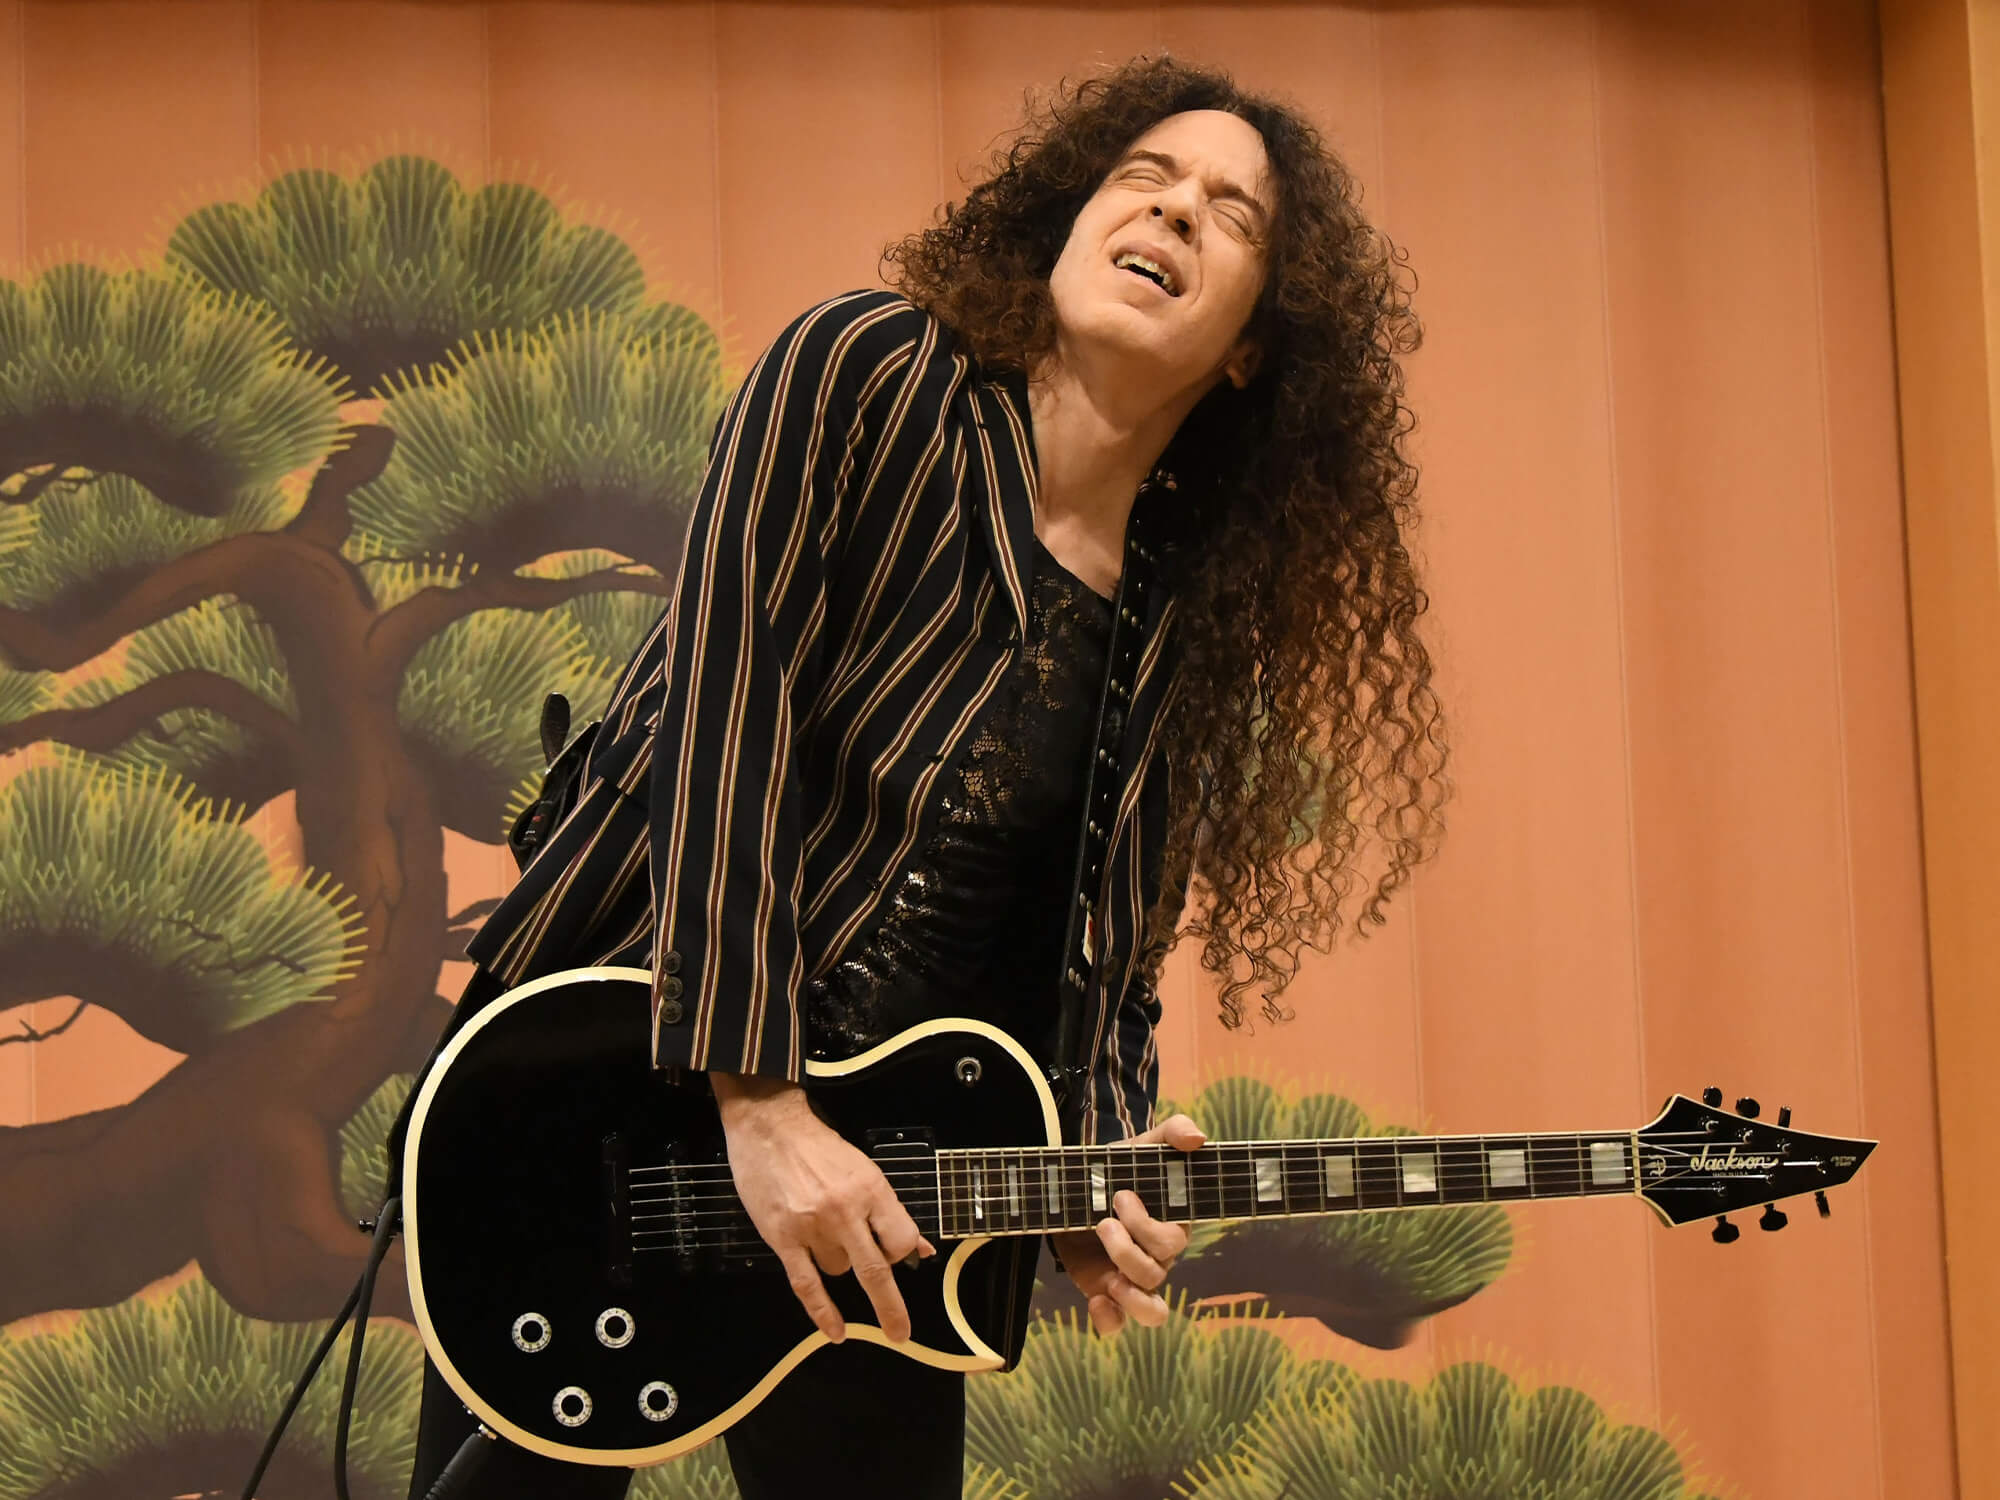 Marty playing guitar. He has his eyes closed and one hand on the high frets, with the other picking the strings. He has long hair and wears dark clothes.